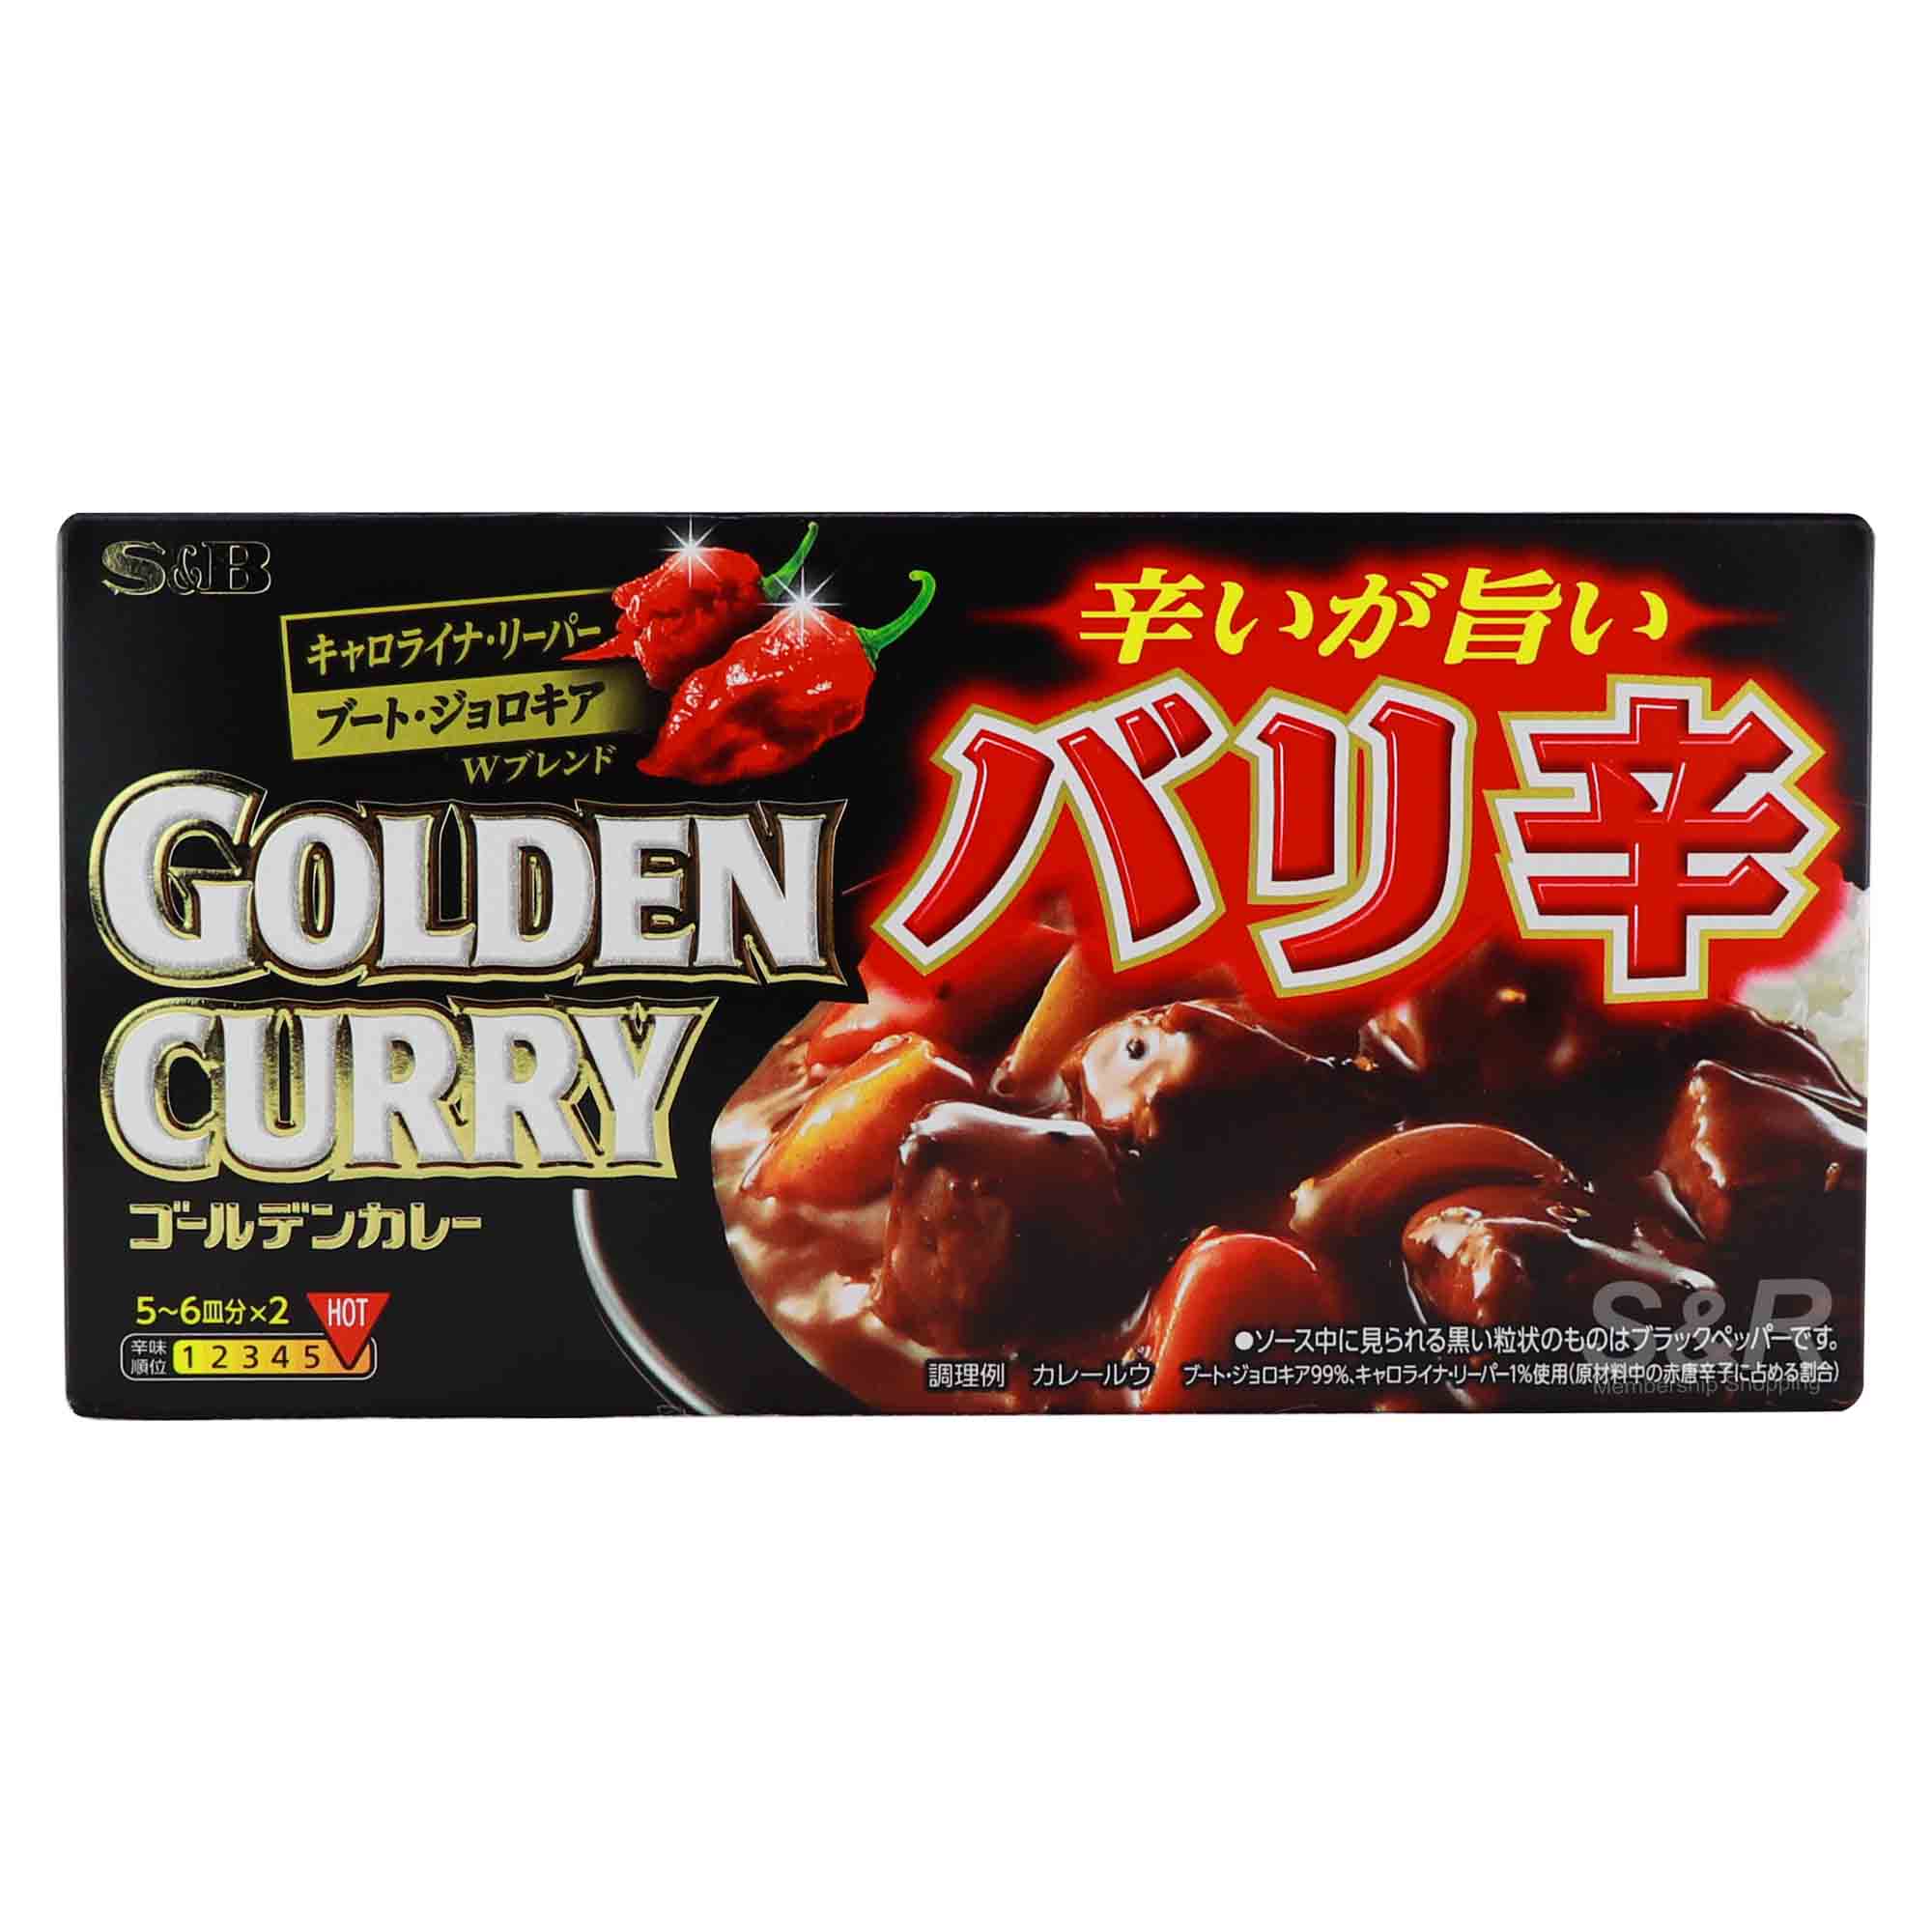 S&B Golden Curry Bali Spicy 198g